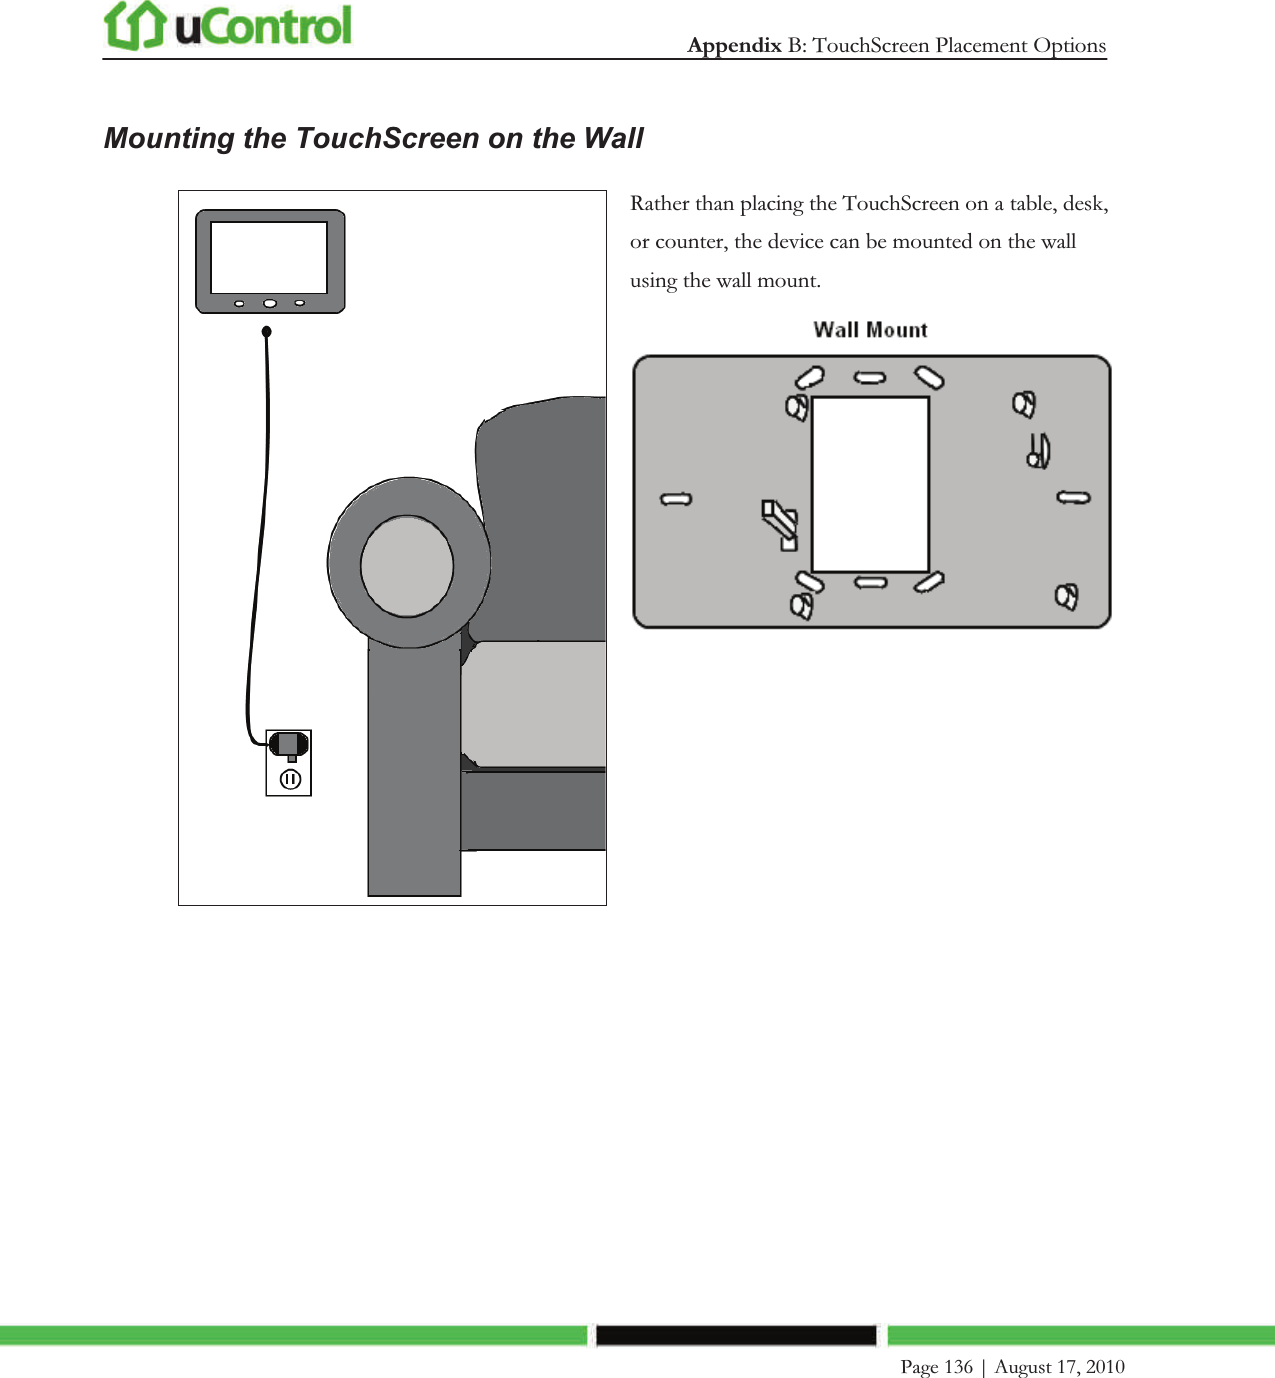  Appendix B: TouchScreen Placement Options    Page 136 | August 17, 2010   Mounting the TouchScreen on the Wall  Rather than placing the TouchScreen on a table, desk, or counter, the device can be mounted on the wall using the wall mount.   